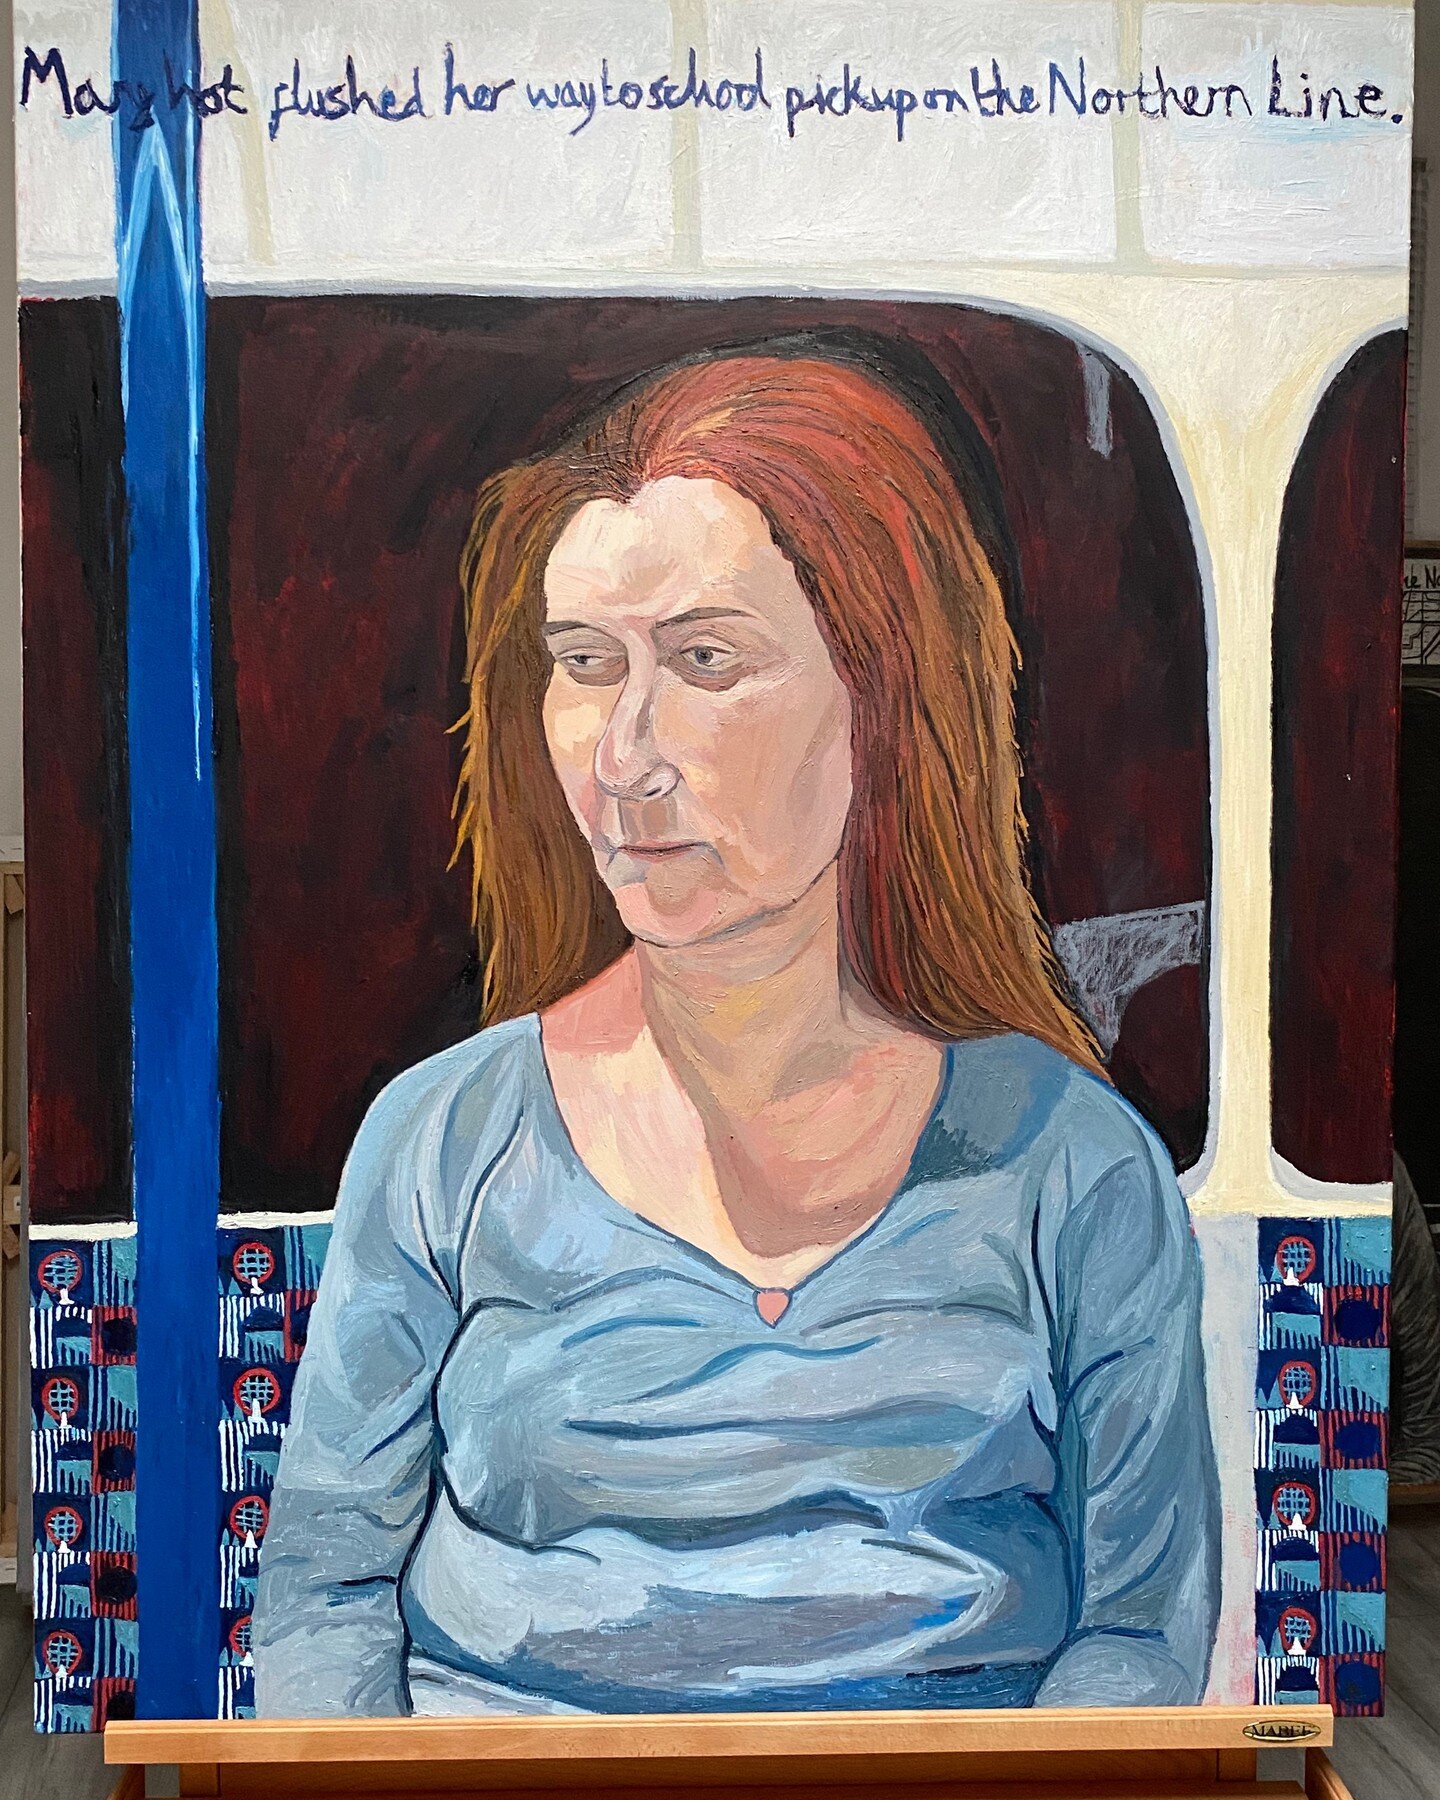 Amongst all the wars and pain in the world (and other more mundane struggles), I am painting Mary having a hot flush on the Northern Line. It's been slow work, and there is so much more to do here, but I feel each painting session takes me somewhere 